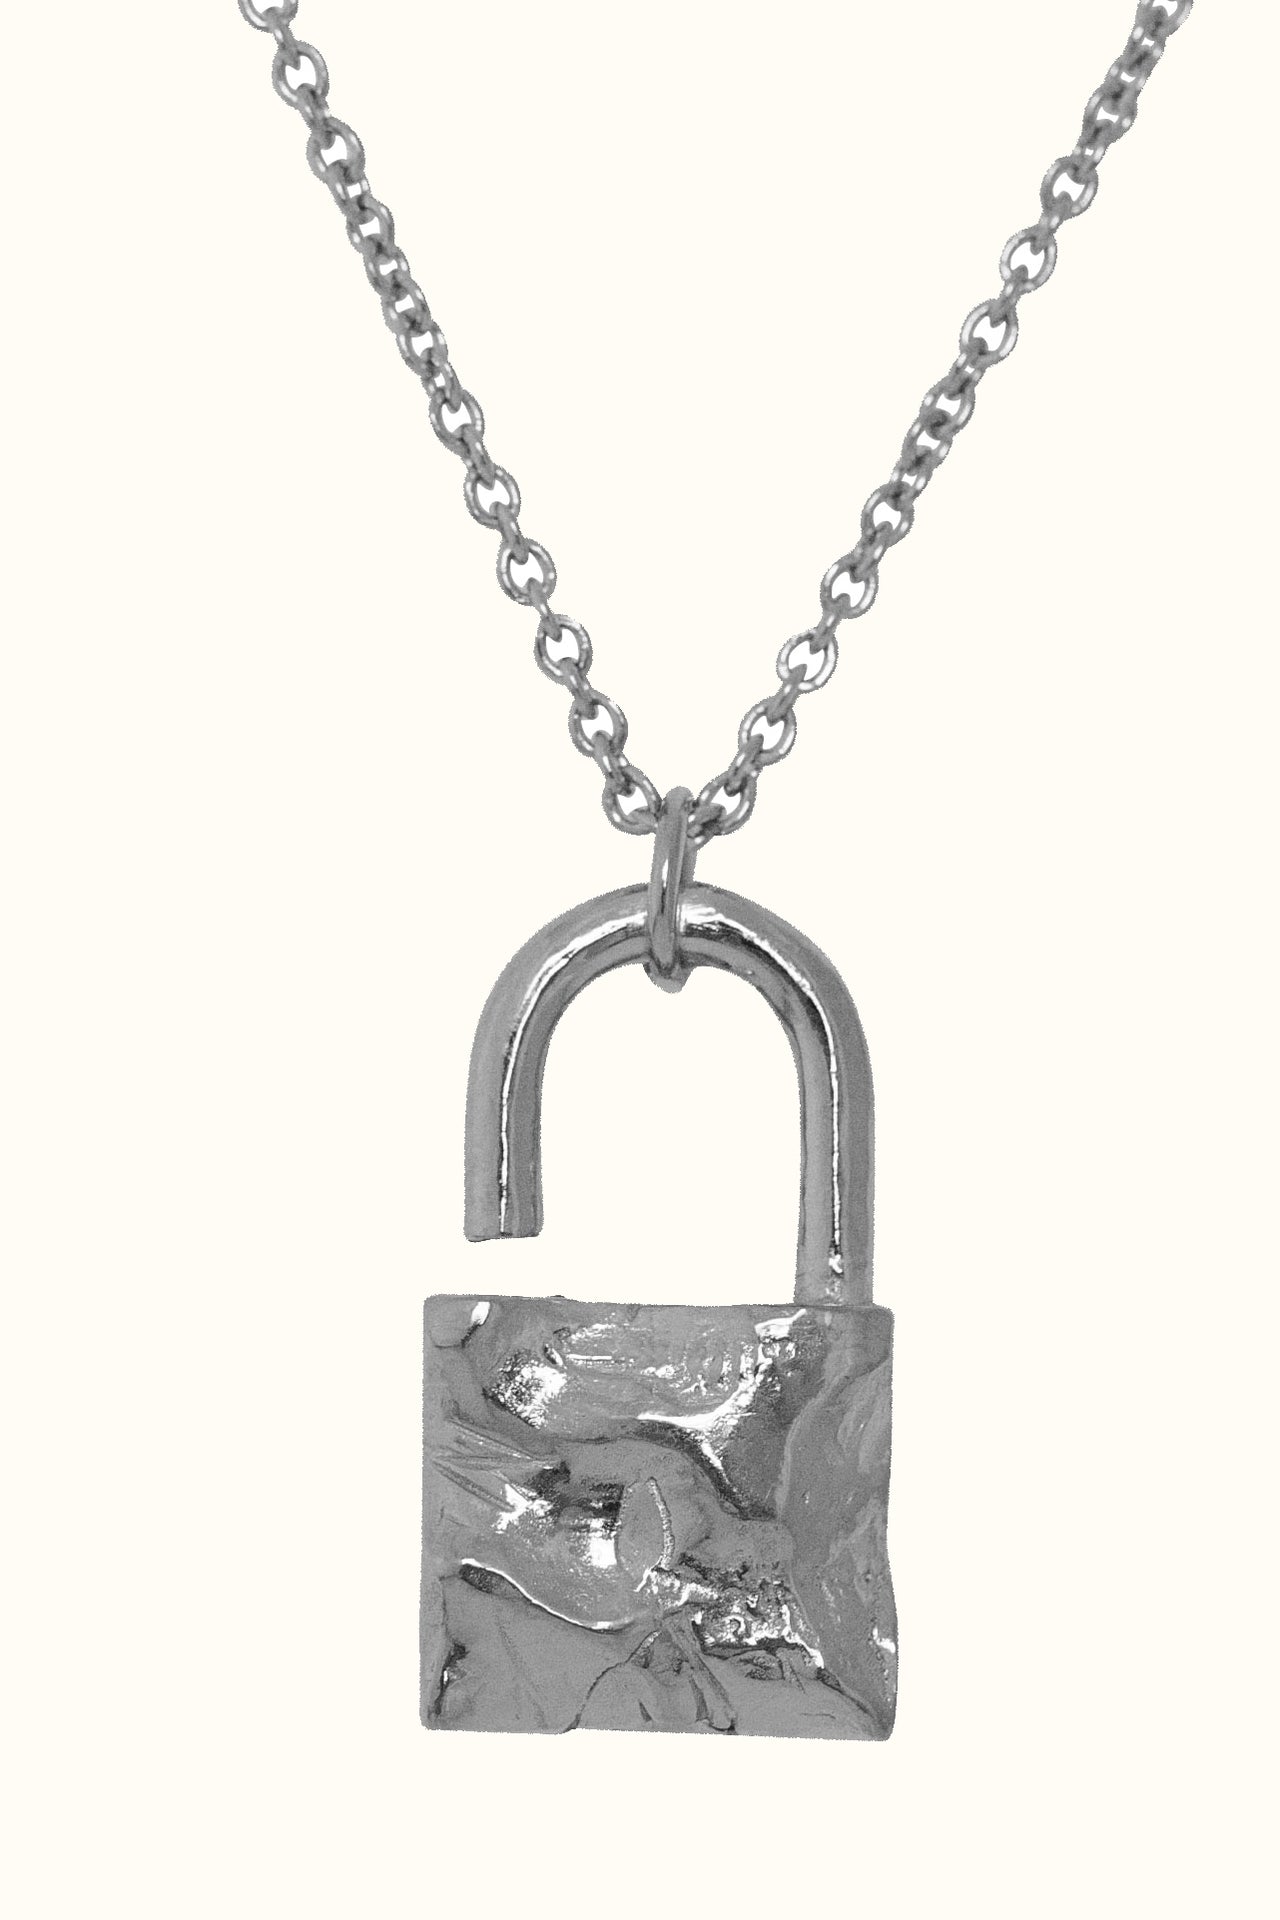 Padlock Necklace – Released From Love